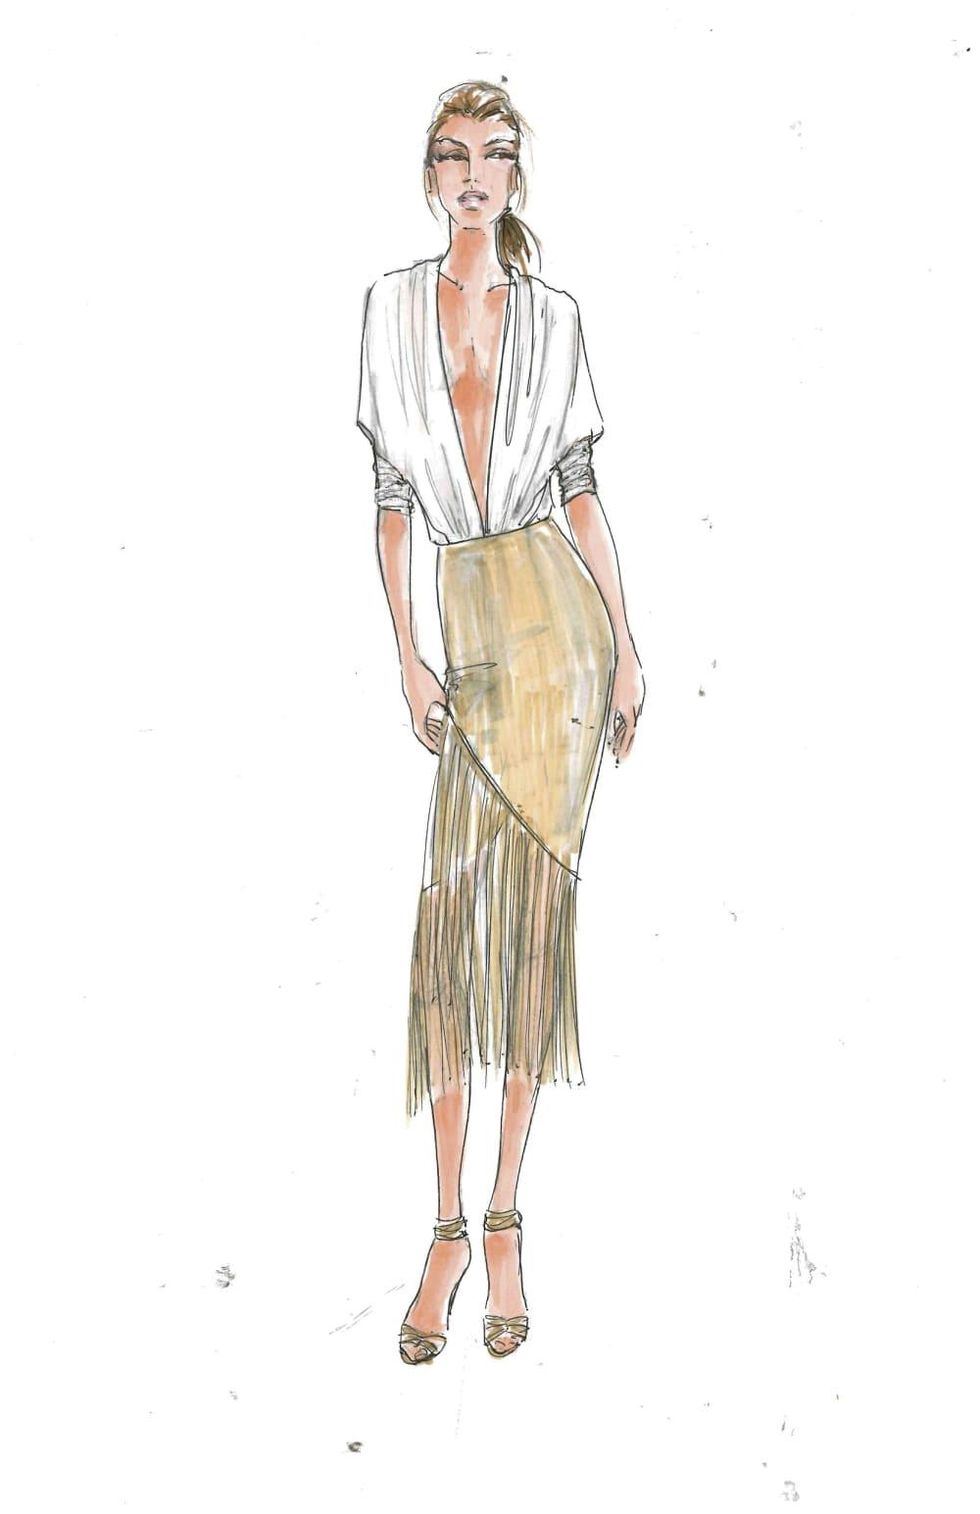 Serena Williams inspiration sketch for HSN collection at New York Fashion Week